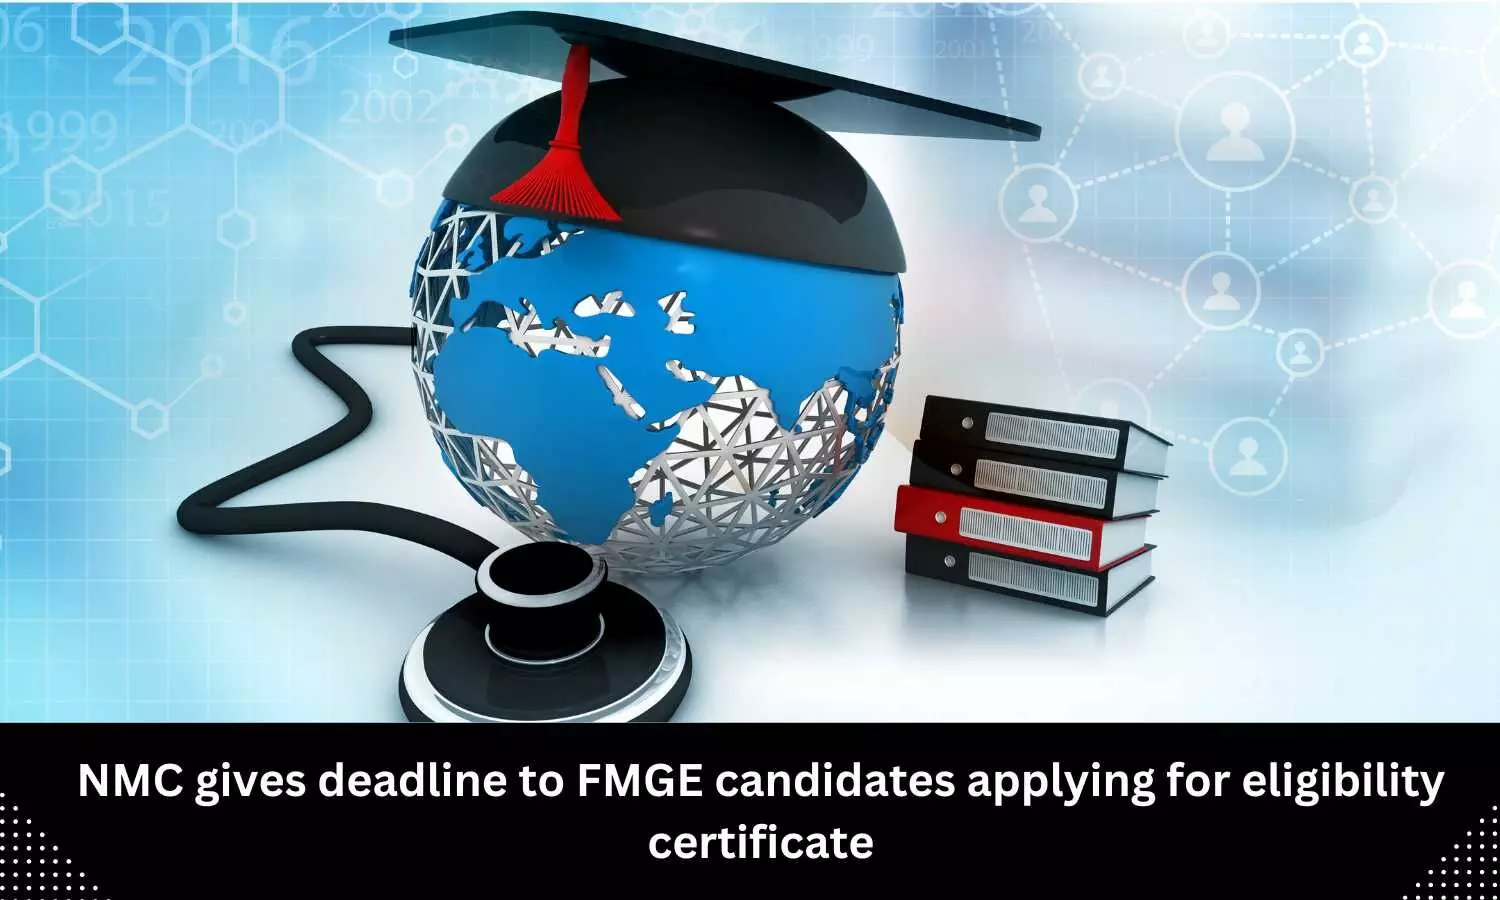 NMC calls for applications from FMGE aspirants seeking eligibility certificates